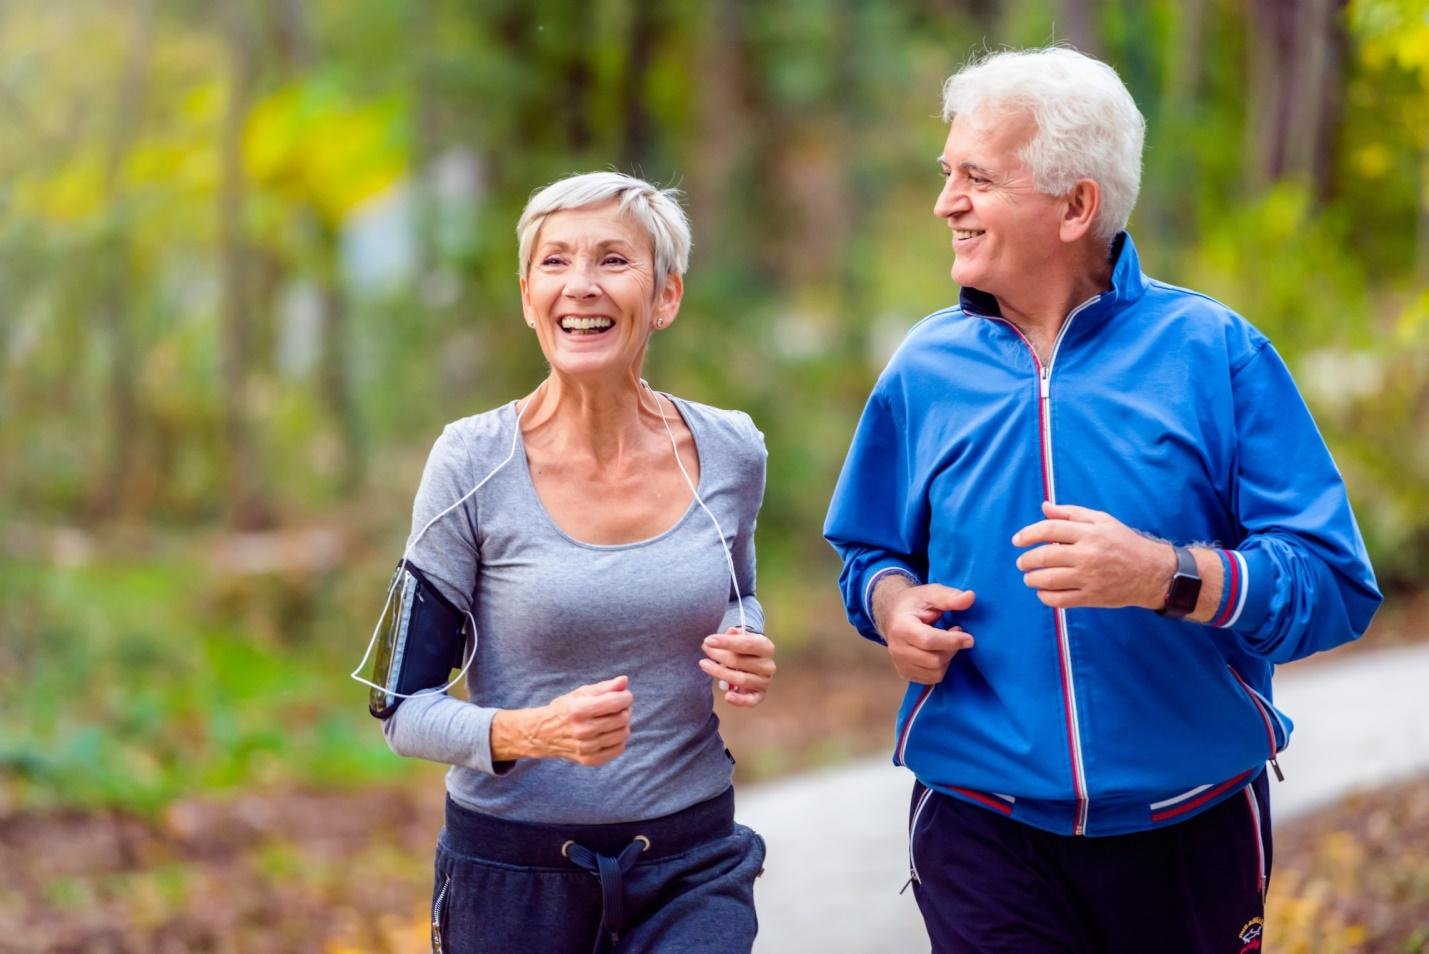 5-physical-activities-that-are-great-for-seniors-the-global-kaka